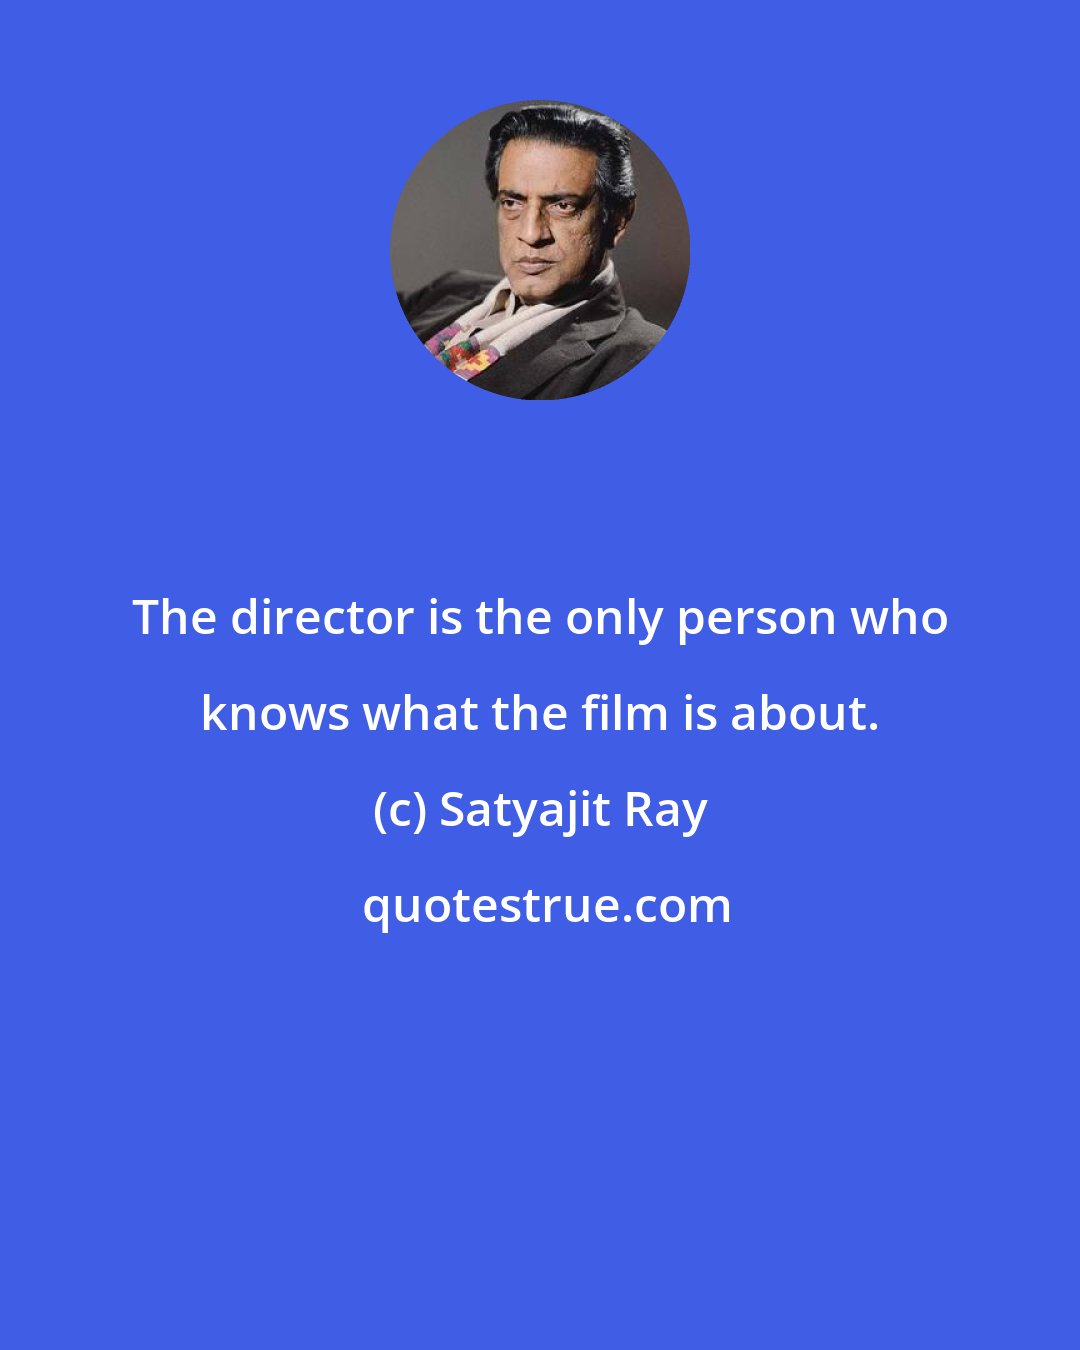 Satyajit Ray: The director is the only person who knows what the film is about.